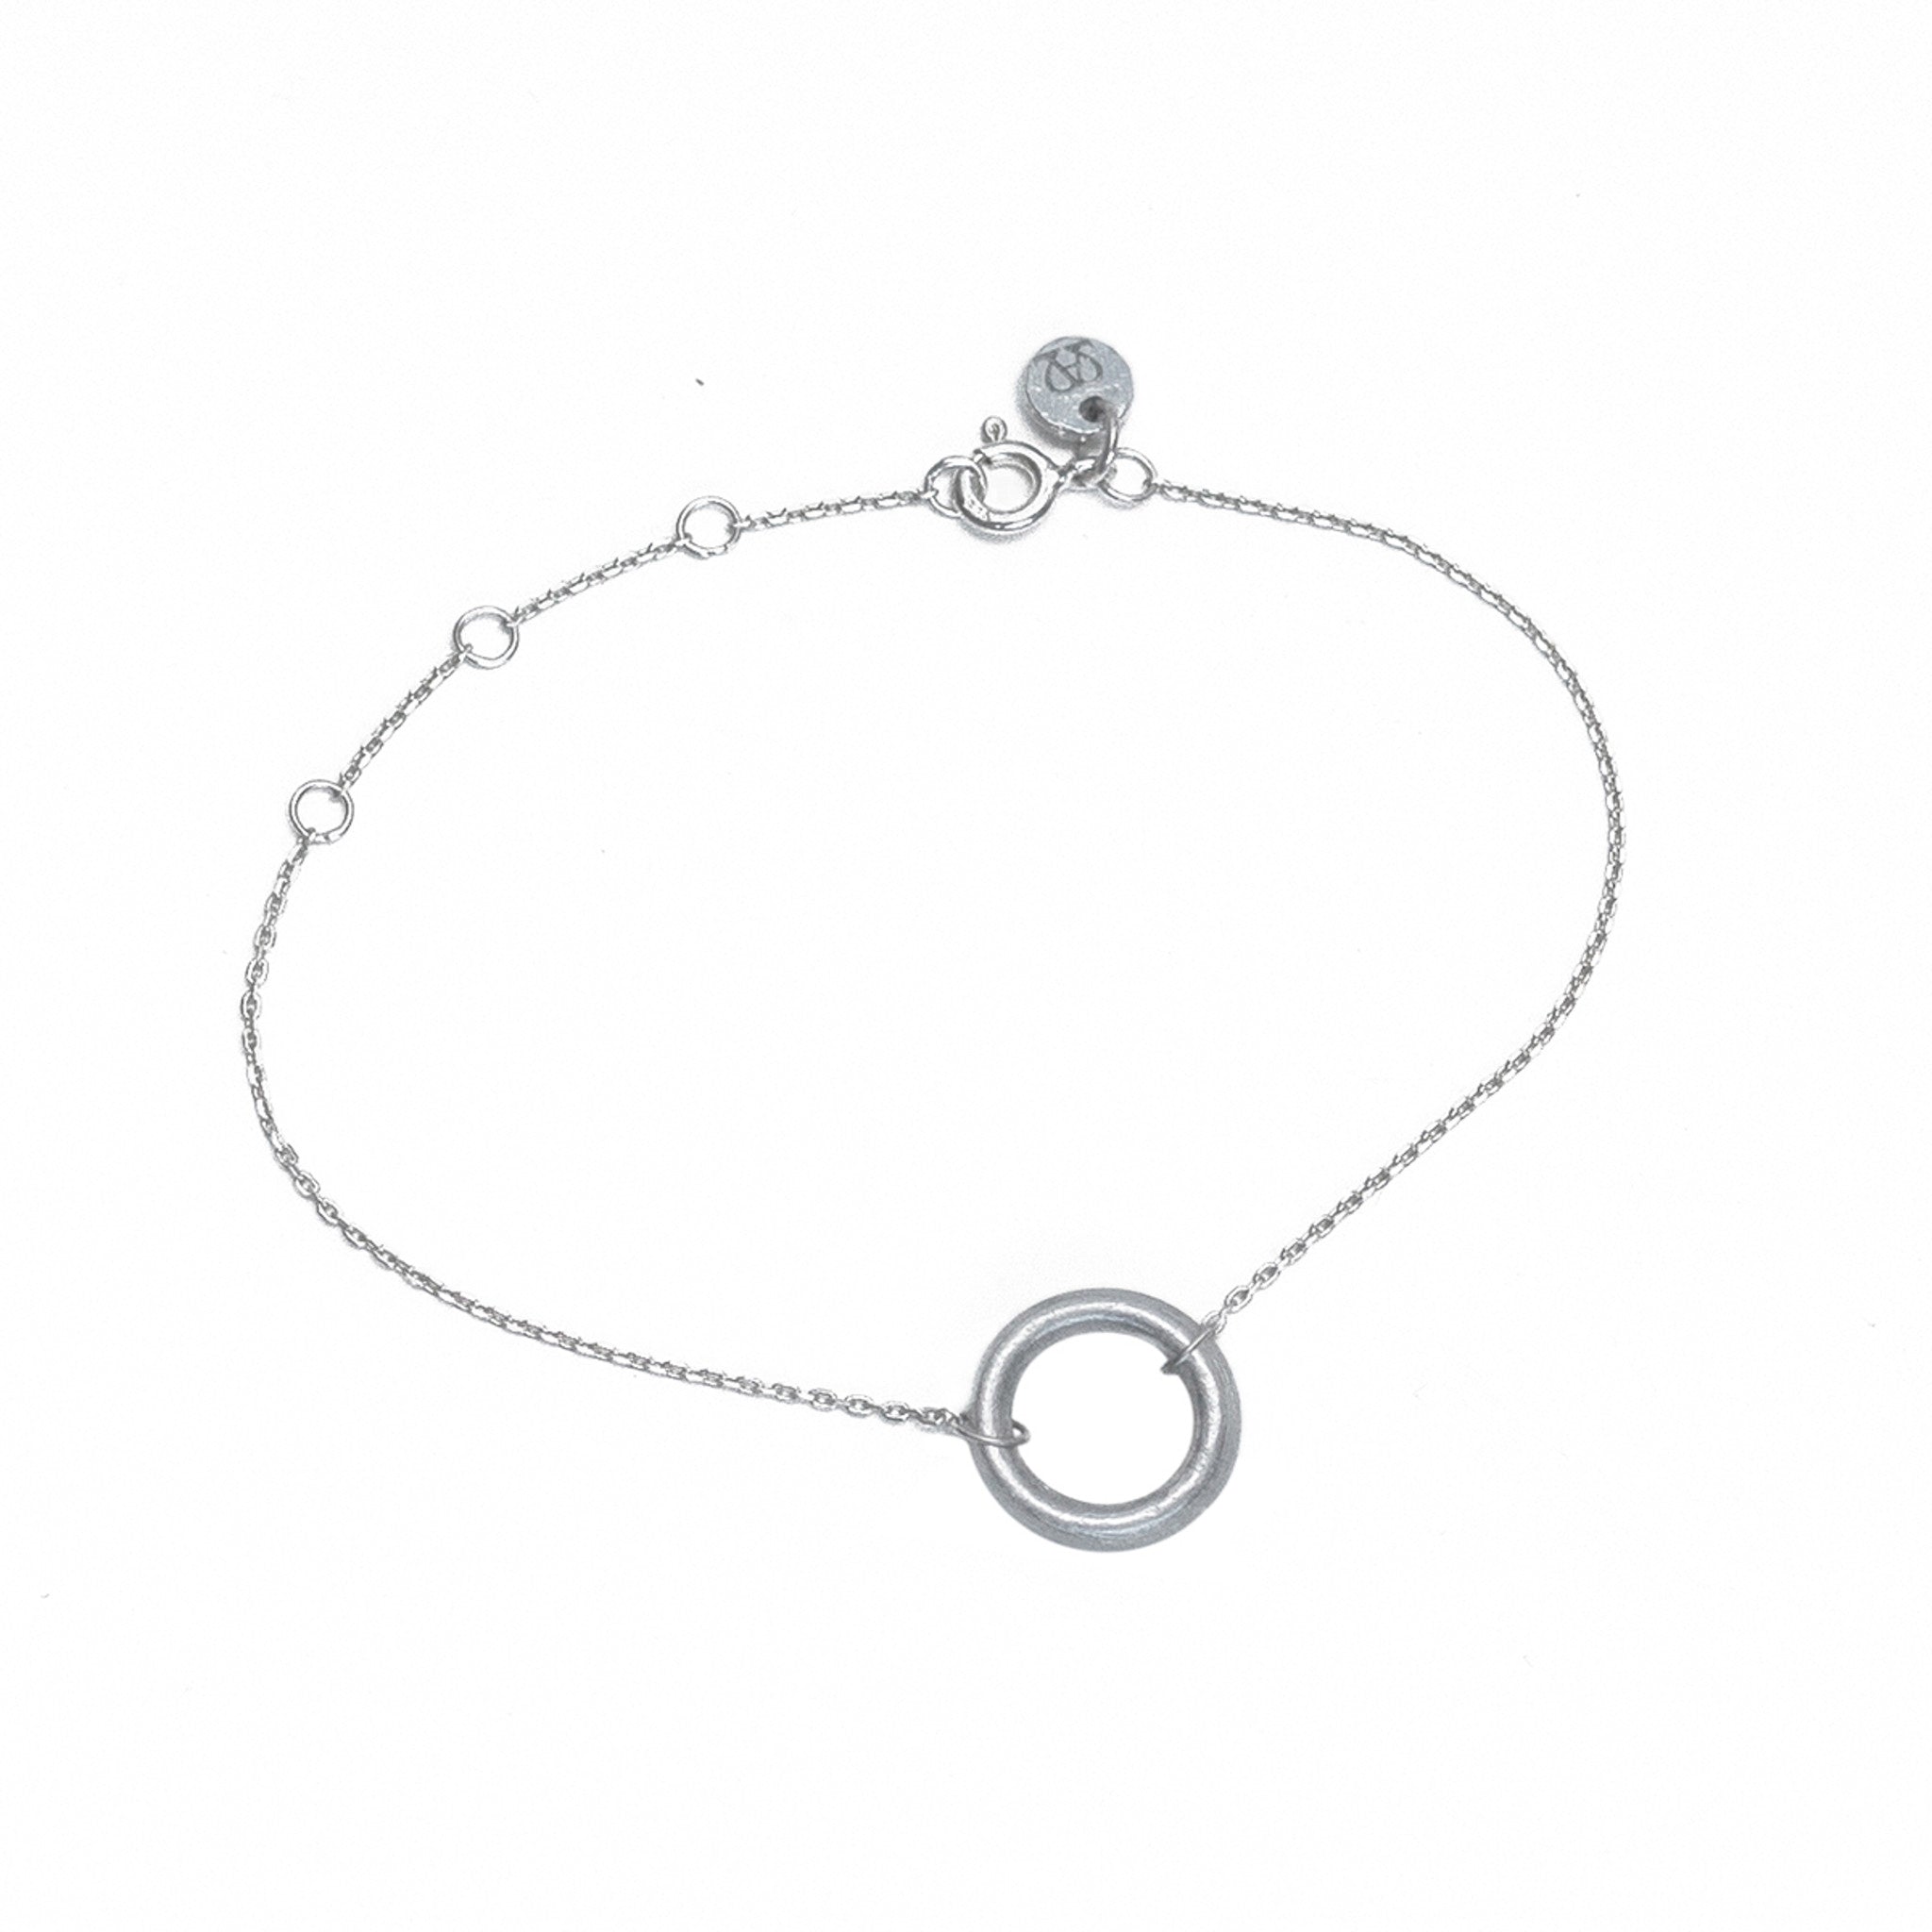 ARTICLE22 Virtuous Full Circle Bracelet - Sustainable Jewelry with a Positive Impact